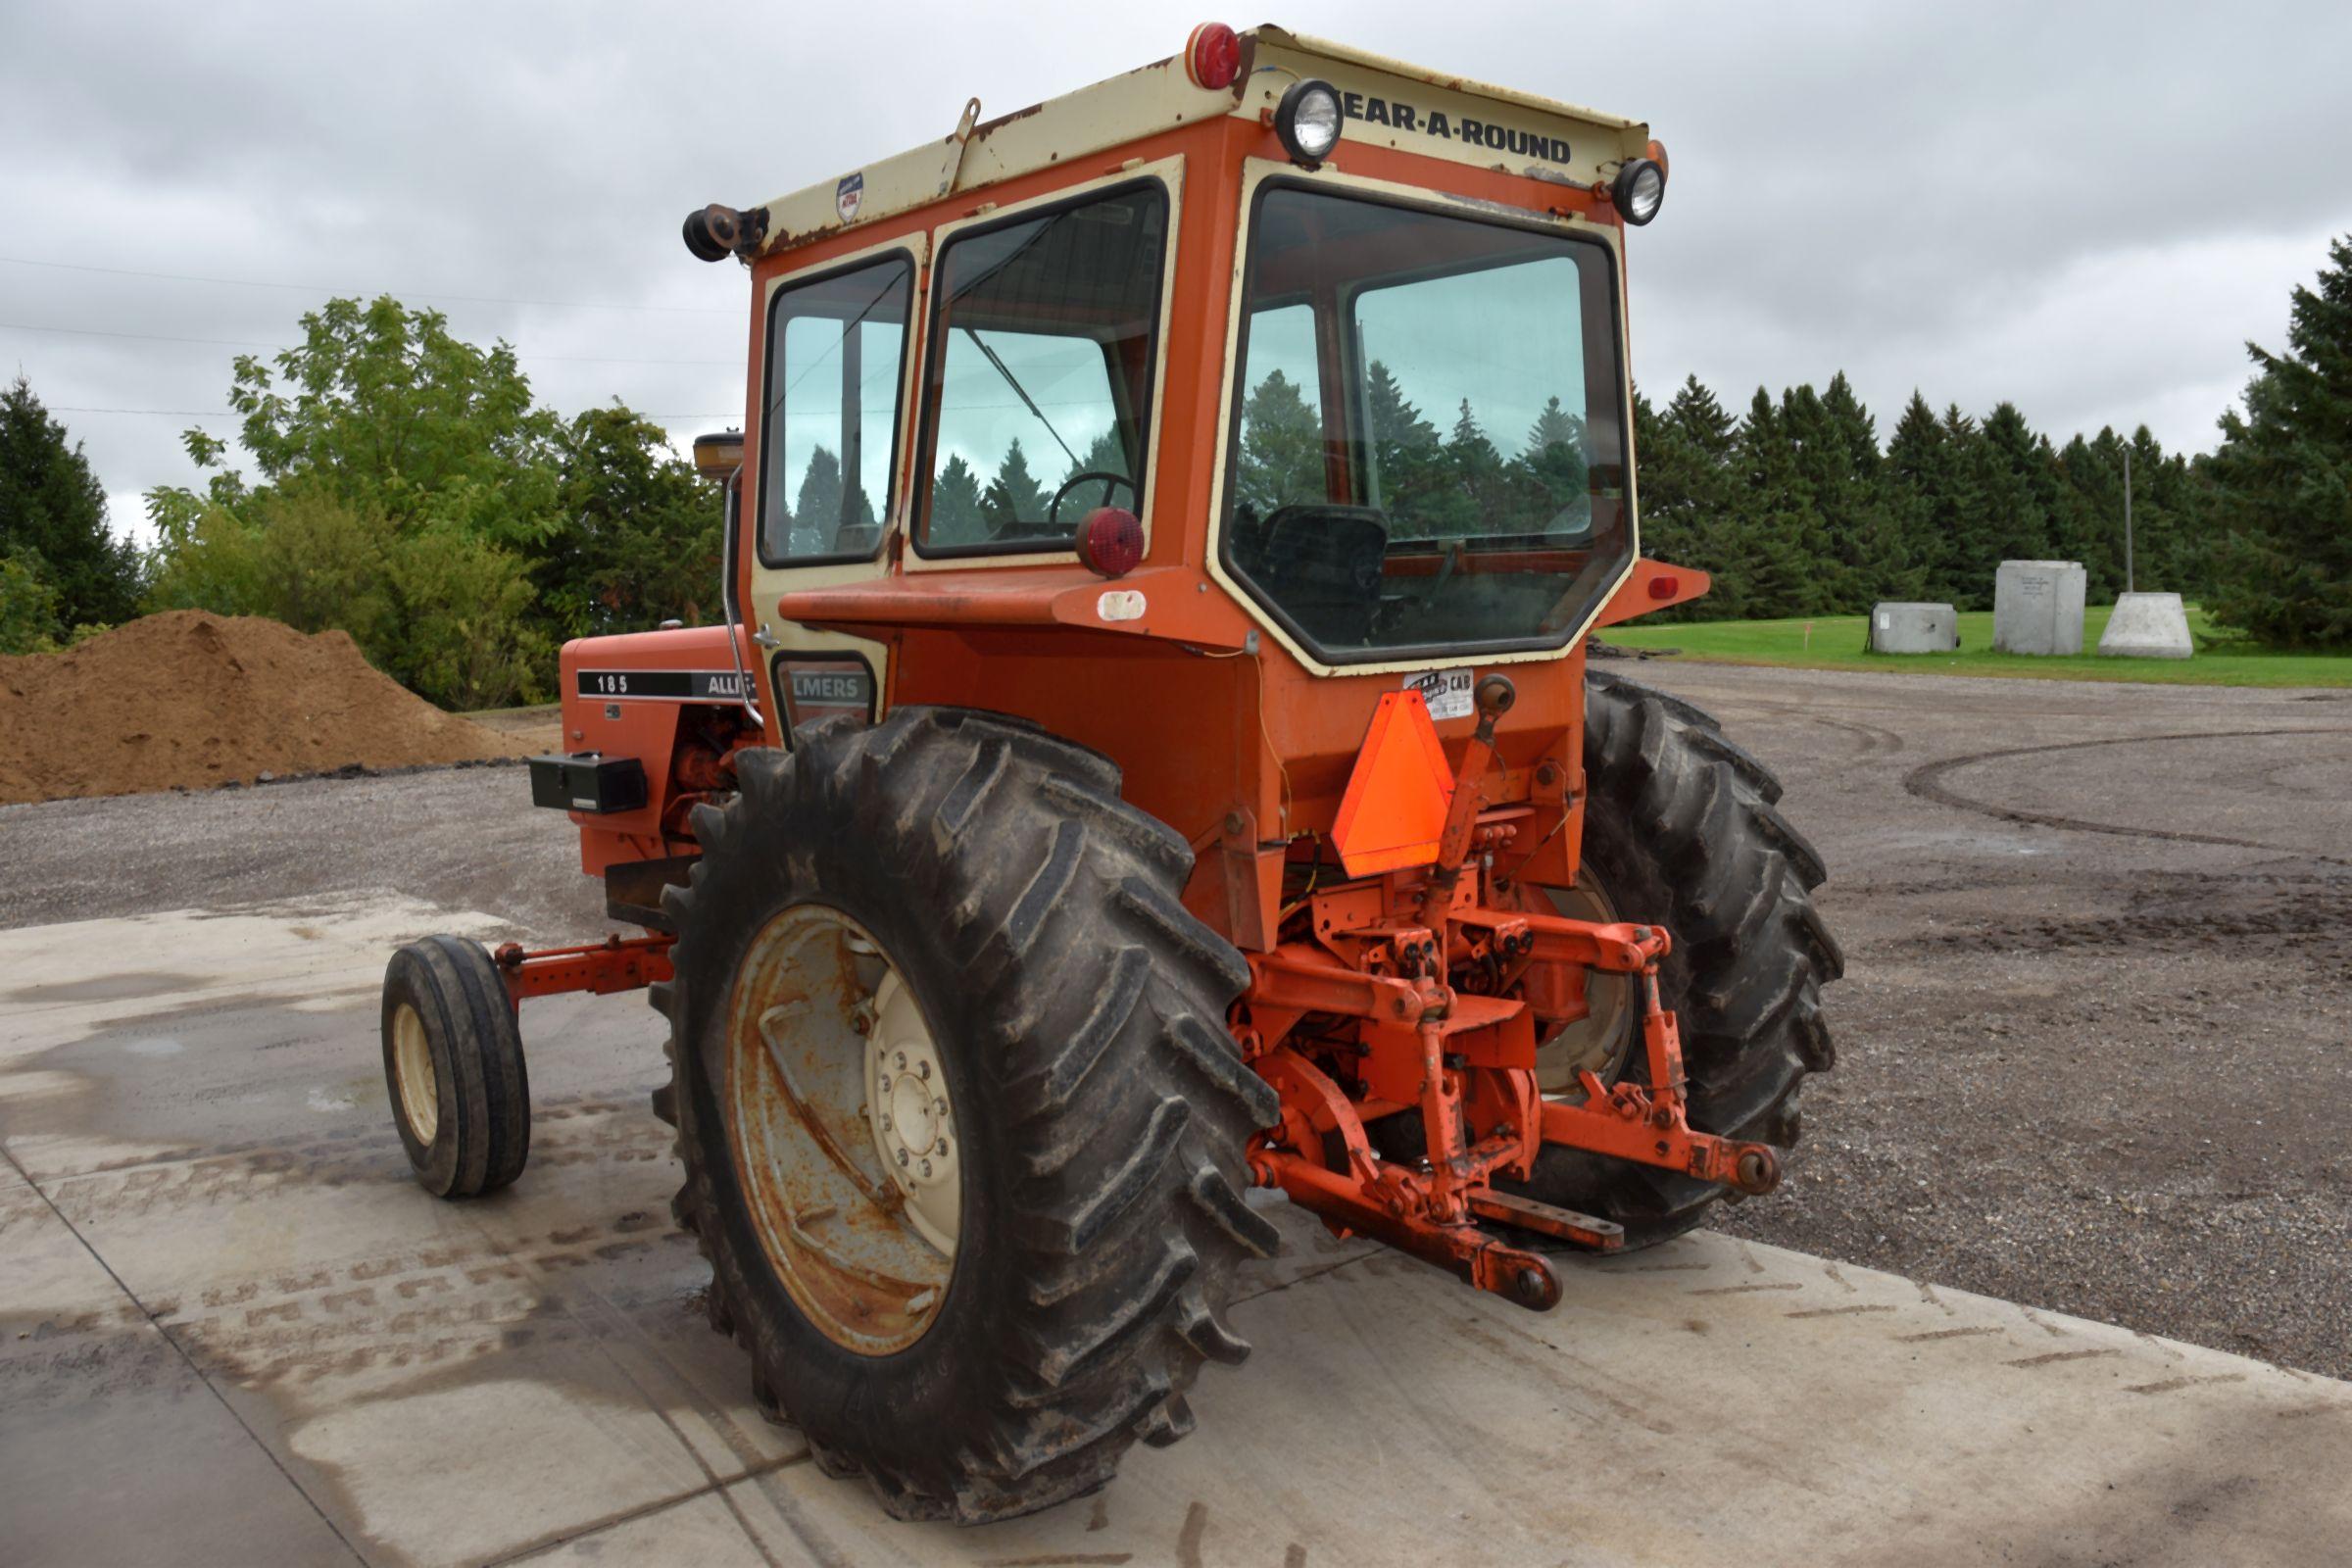 Allis Chalmers 185 Diesel Tractor, 2WD, 4153 Actual One Owner Hours, 18.4R30 Tires AT 90%, Hi/Lo 4 S